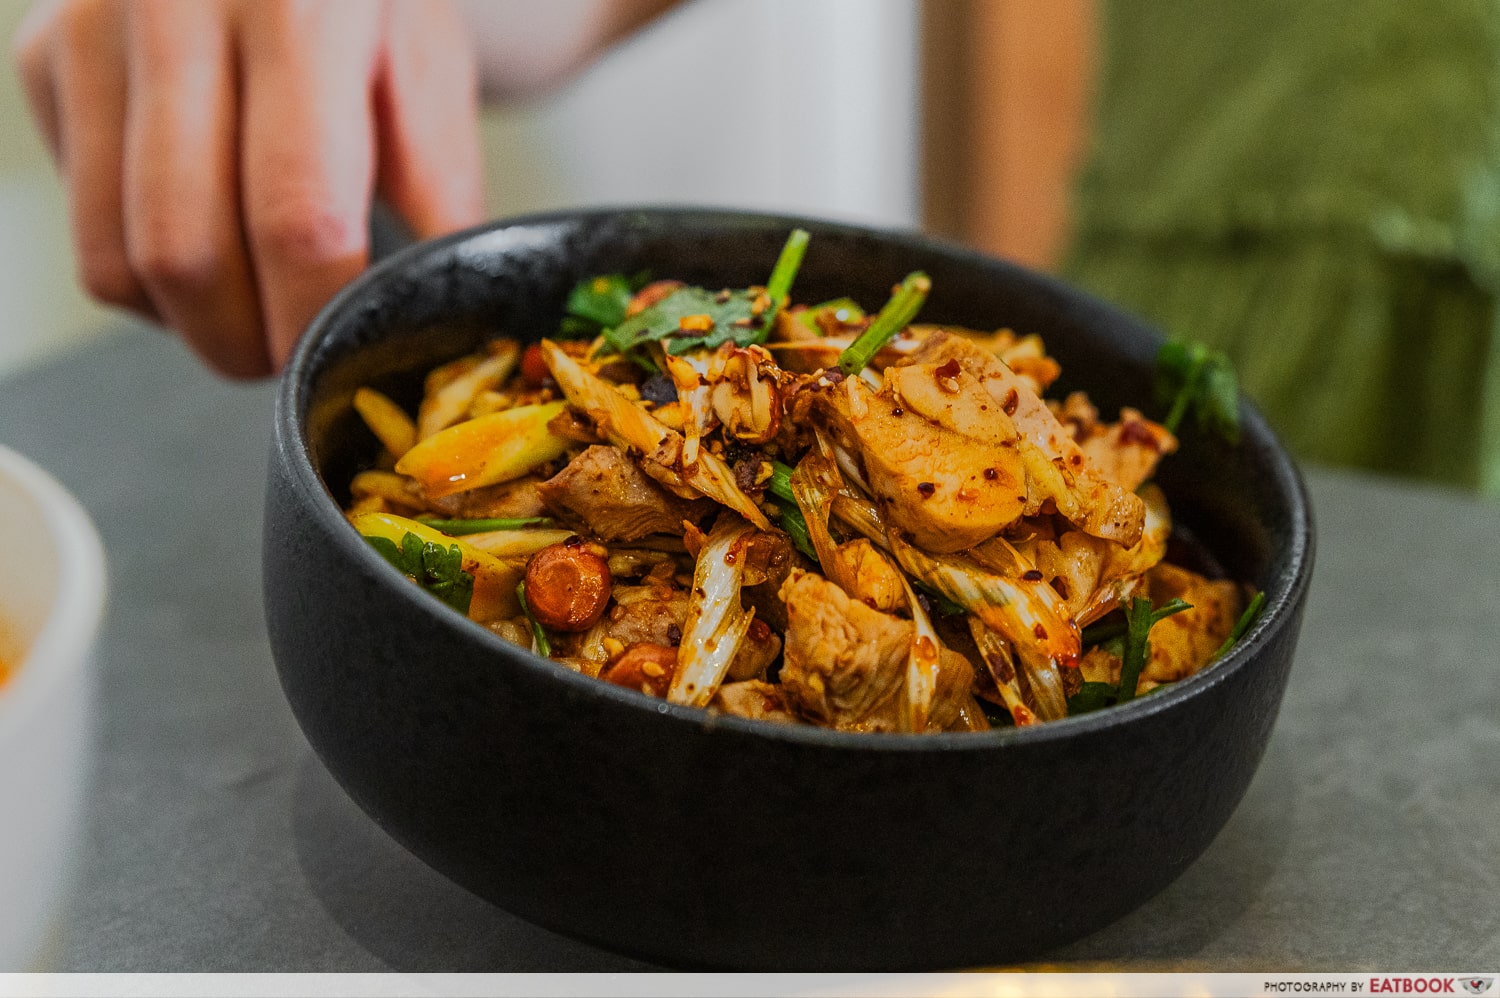 chengdu bowl - sichuan spiced mouthwatering spicy chicken